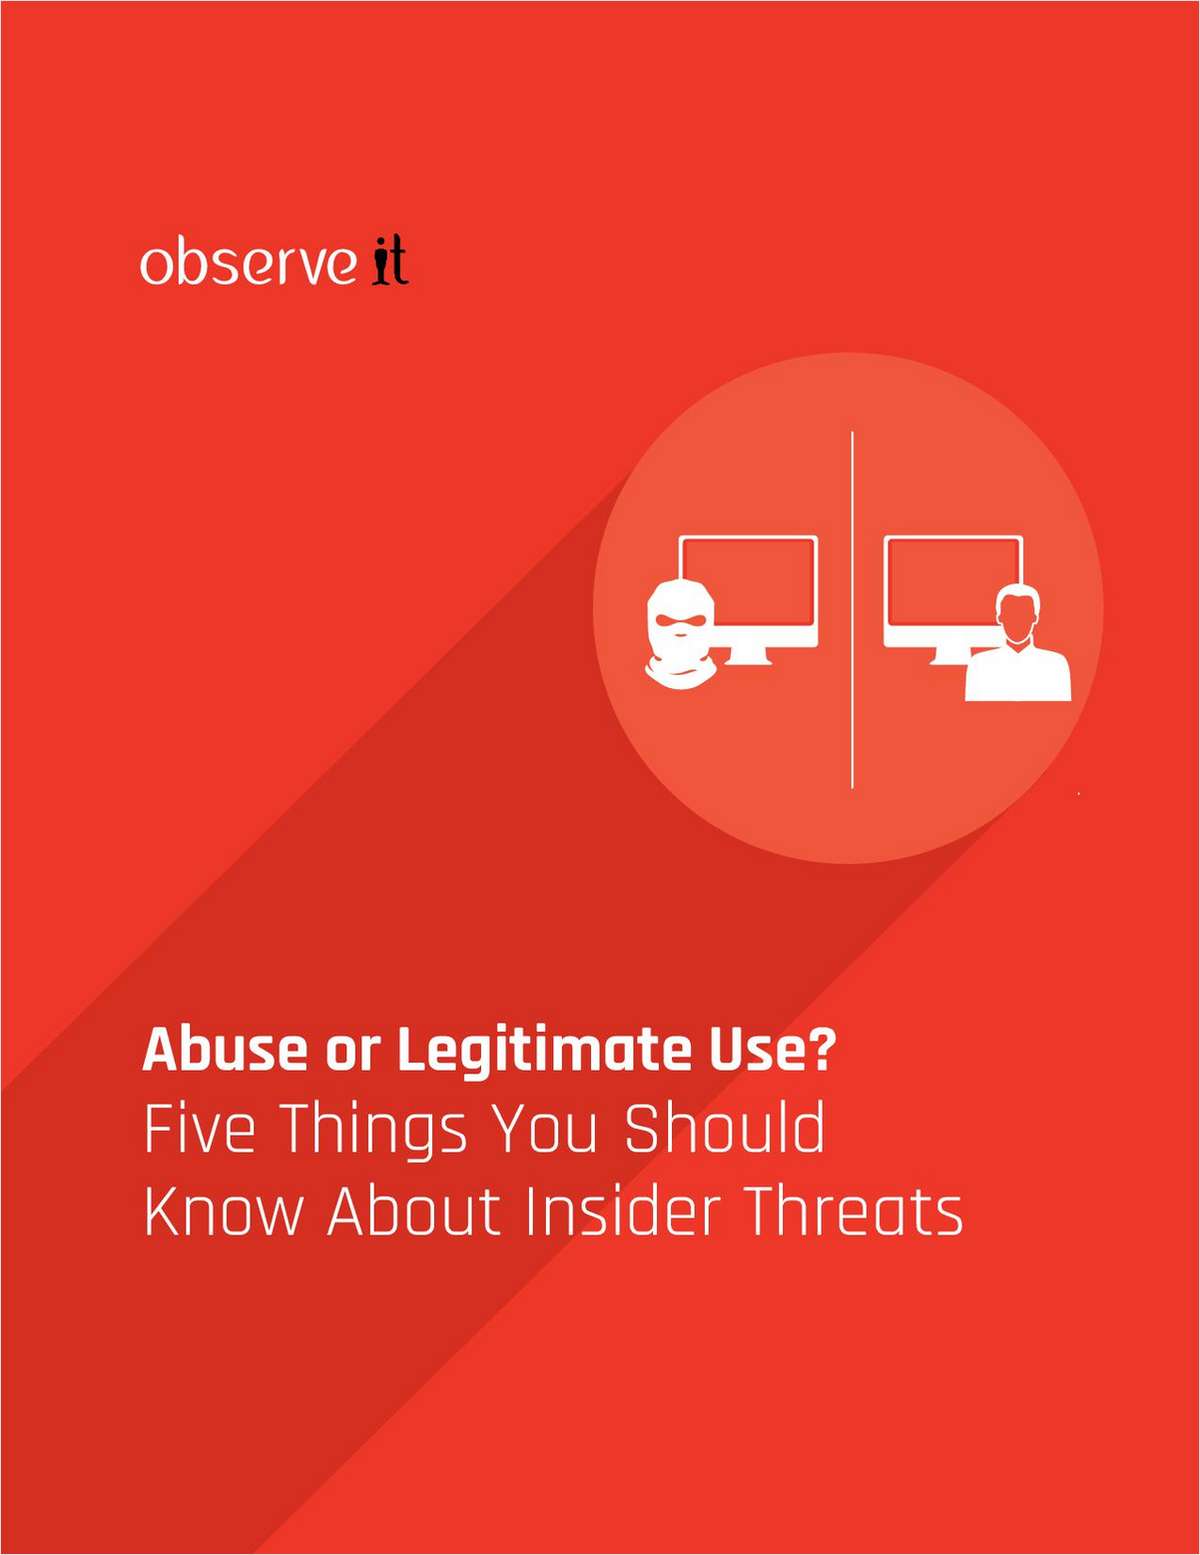 Five Things You Should Know About Insider Threats